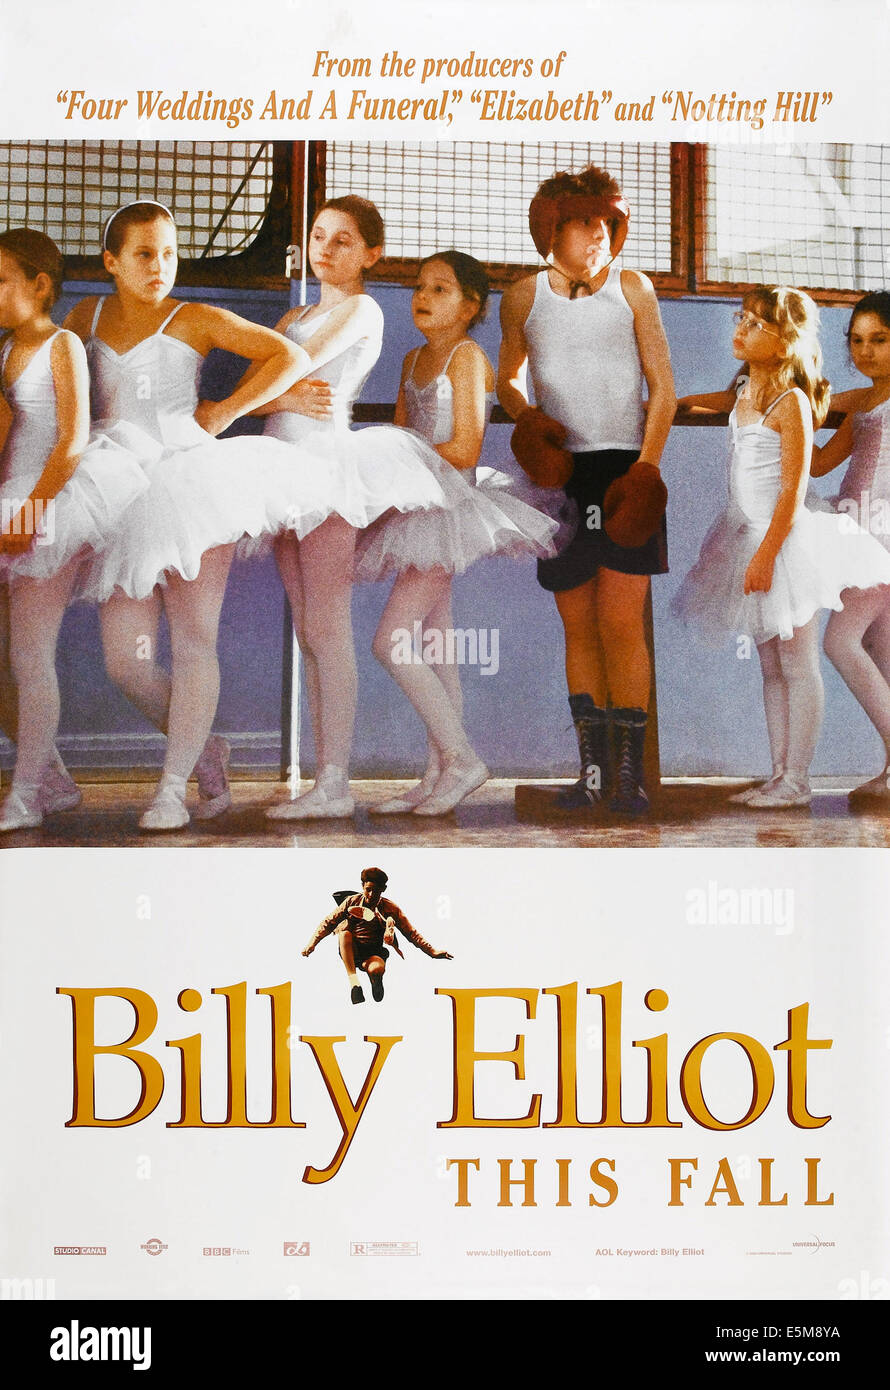 BILLY ELLIOT, US advance poster art, Jamie Bell (with gloves), 2000. ©Universal/courtesy Everett Collection Stock Photo